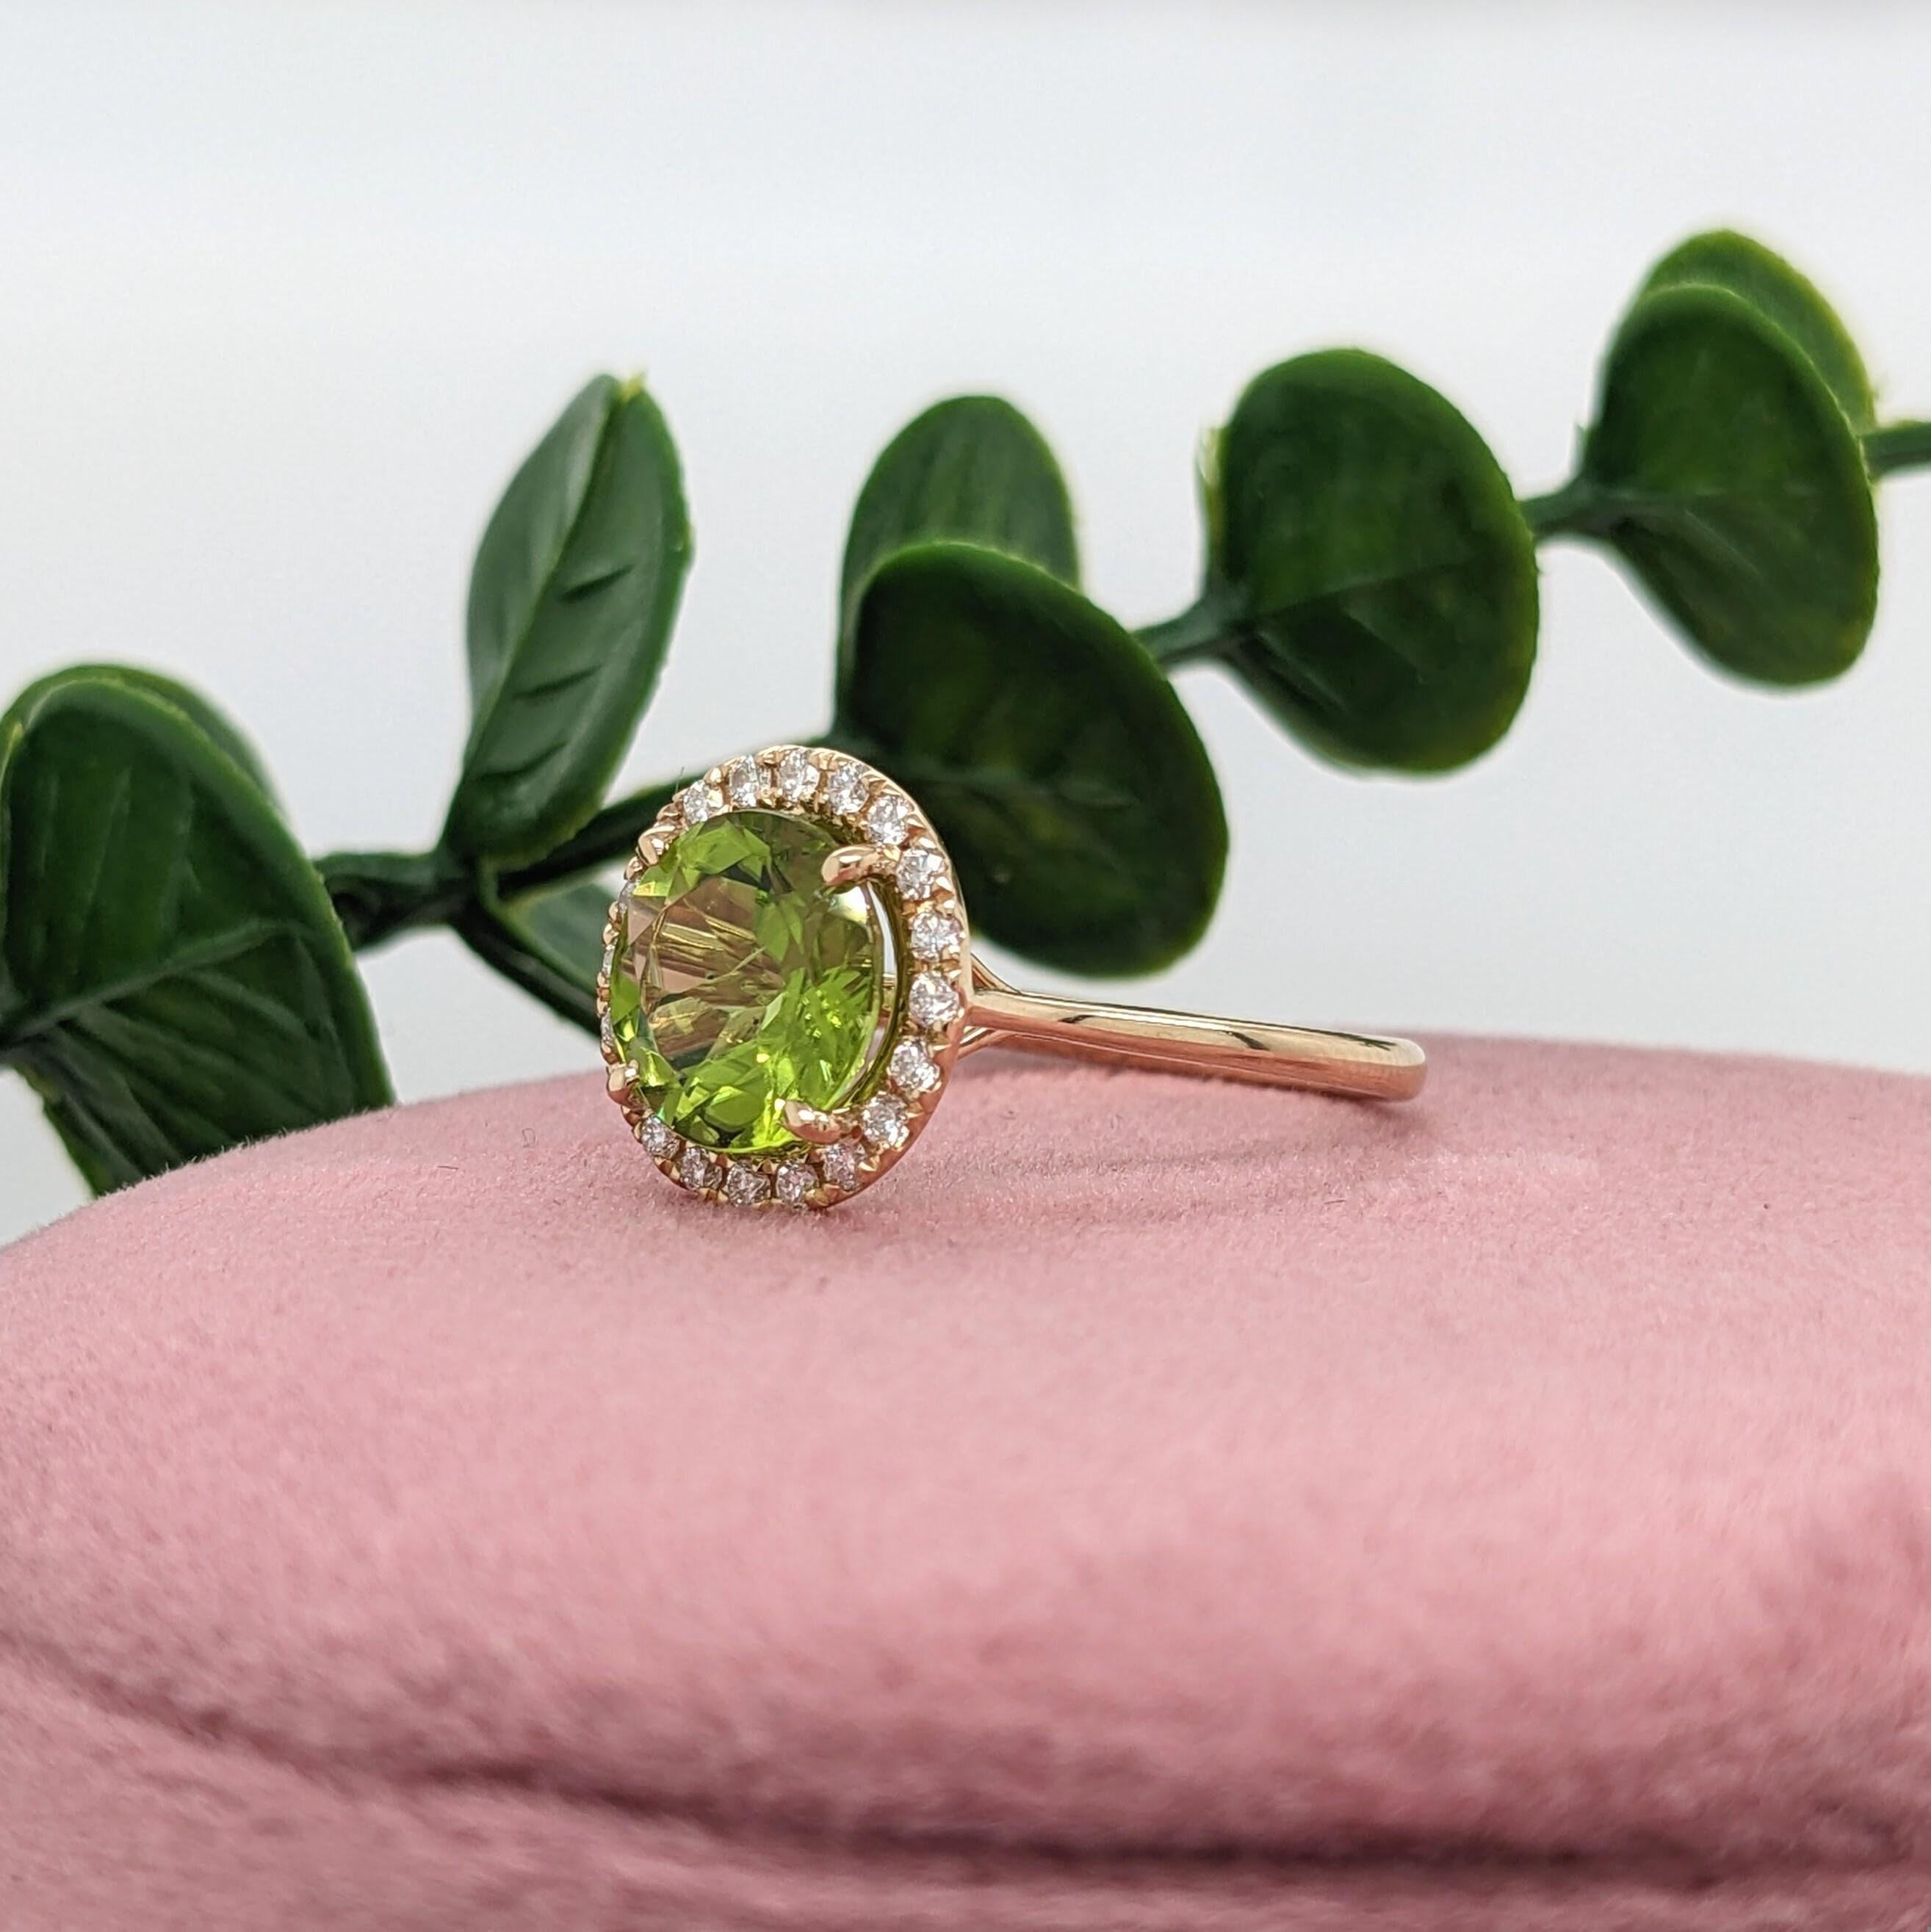 This beautiful ring features a 2.7ct sparkling round peridot in a stunning setting made in solid 14k gold with a halo of all natural earth mined diamonds. Enjoy the gorgeous shade of green and beautiful clarity of this natural peridot! This ring